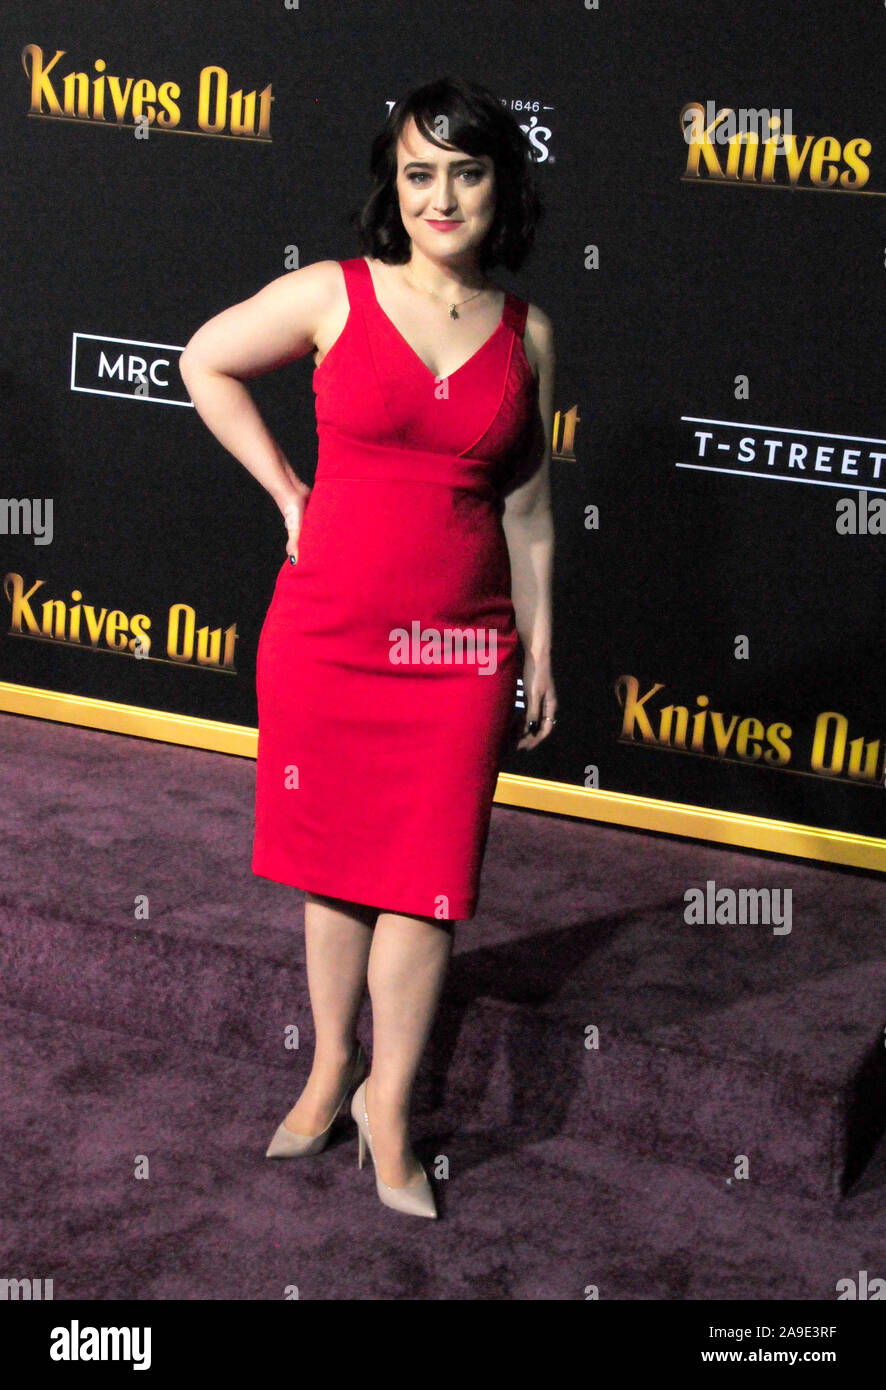 Los Angeles, California, USA 14th November 2019 Actress Mara Wilson attends the Los Angeles Premiere of Lionsgate's 'Knives Out' on November 14, 2019 at Regency Village Theatre in Los Angeles, California, USA. Photo by Barry King/Alamy Live News Stock Photo